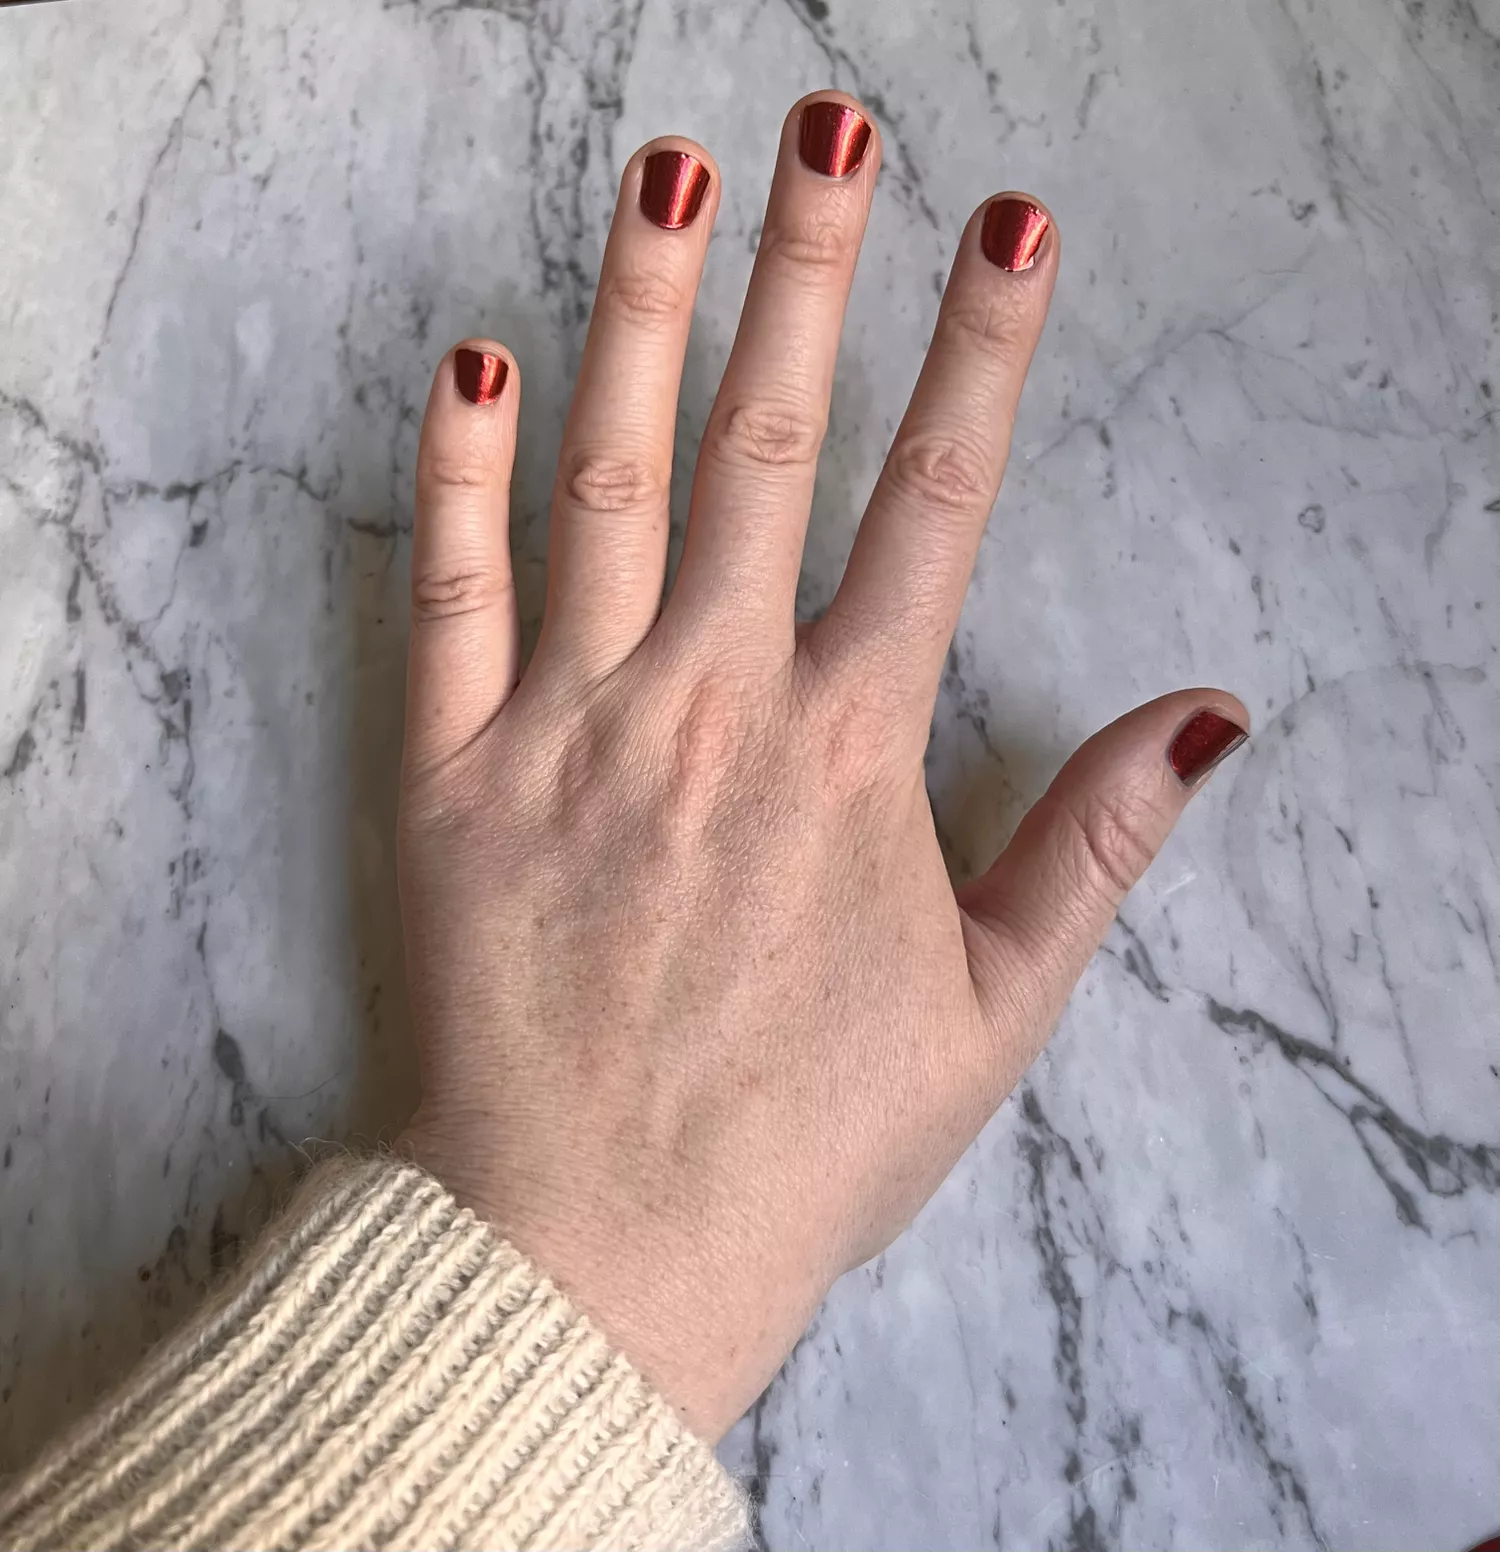 photo of hand with red nail wraps applied to shorter fingernails